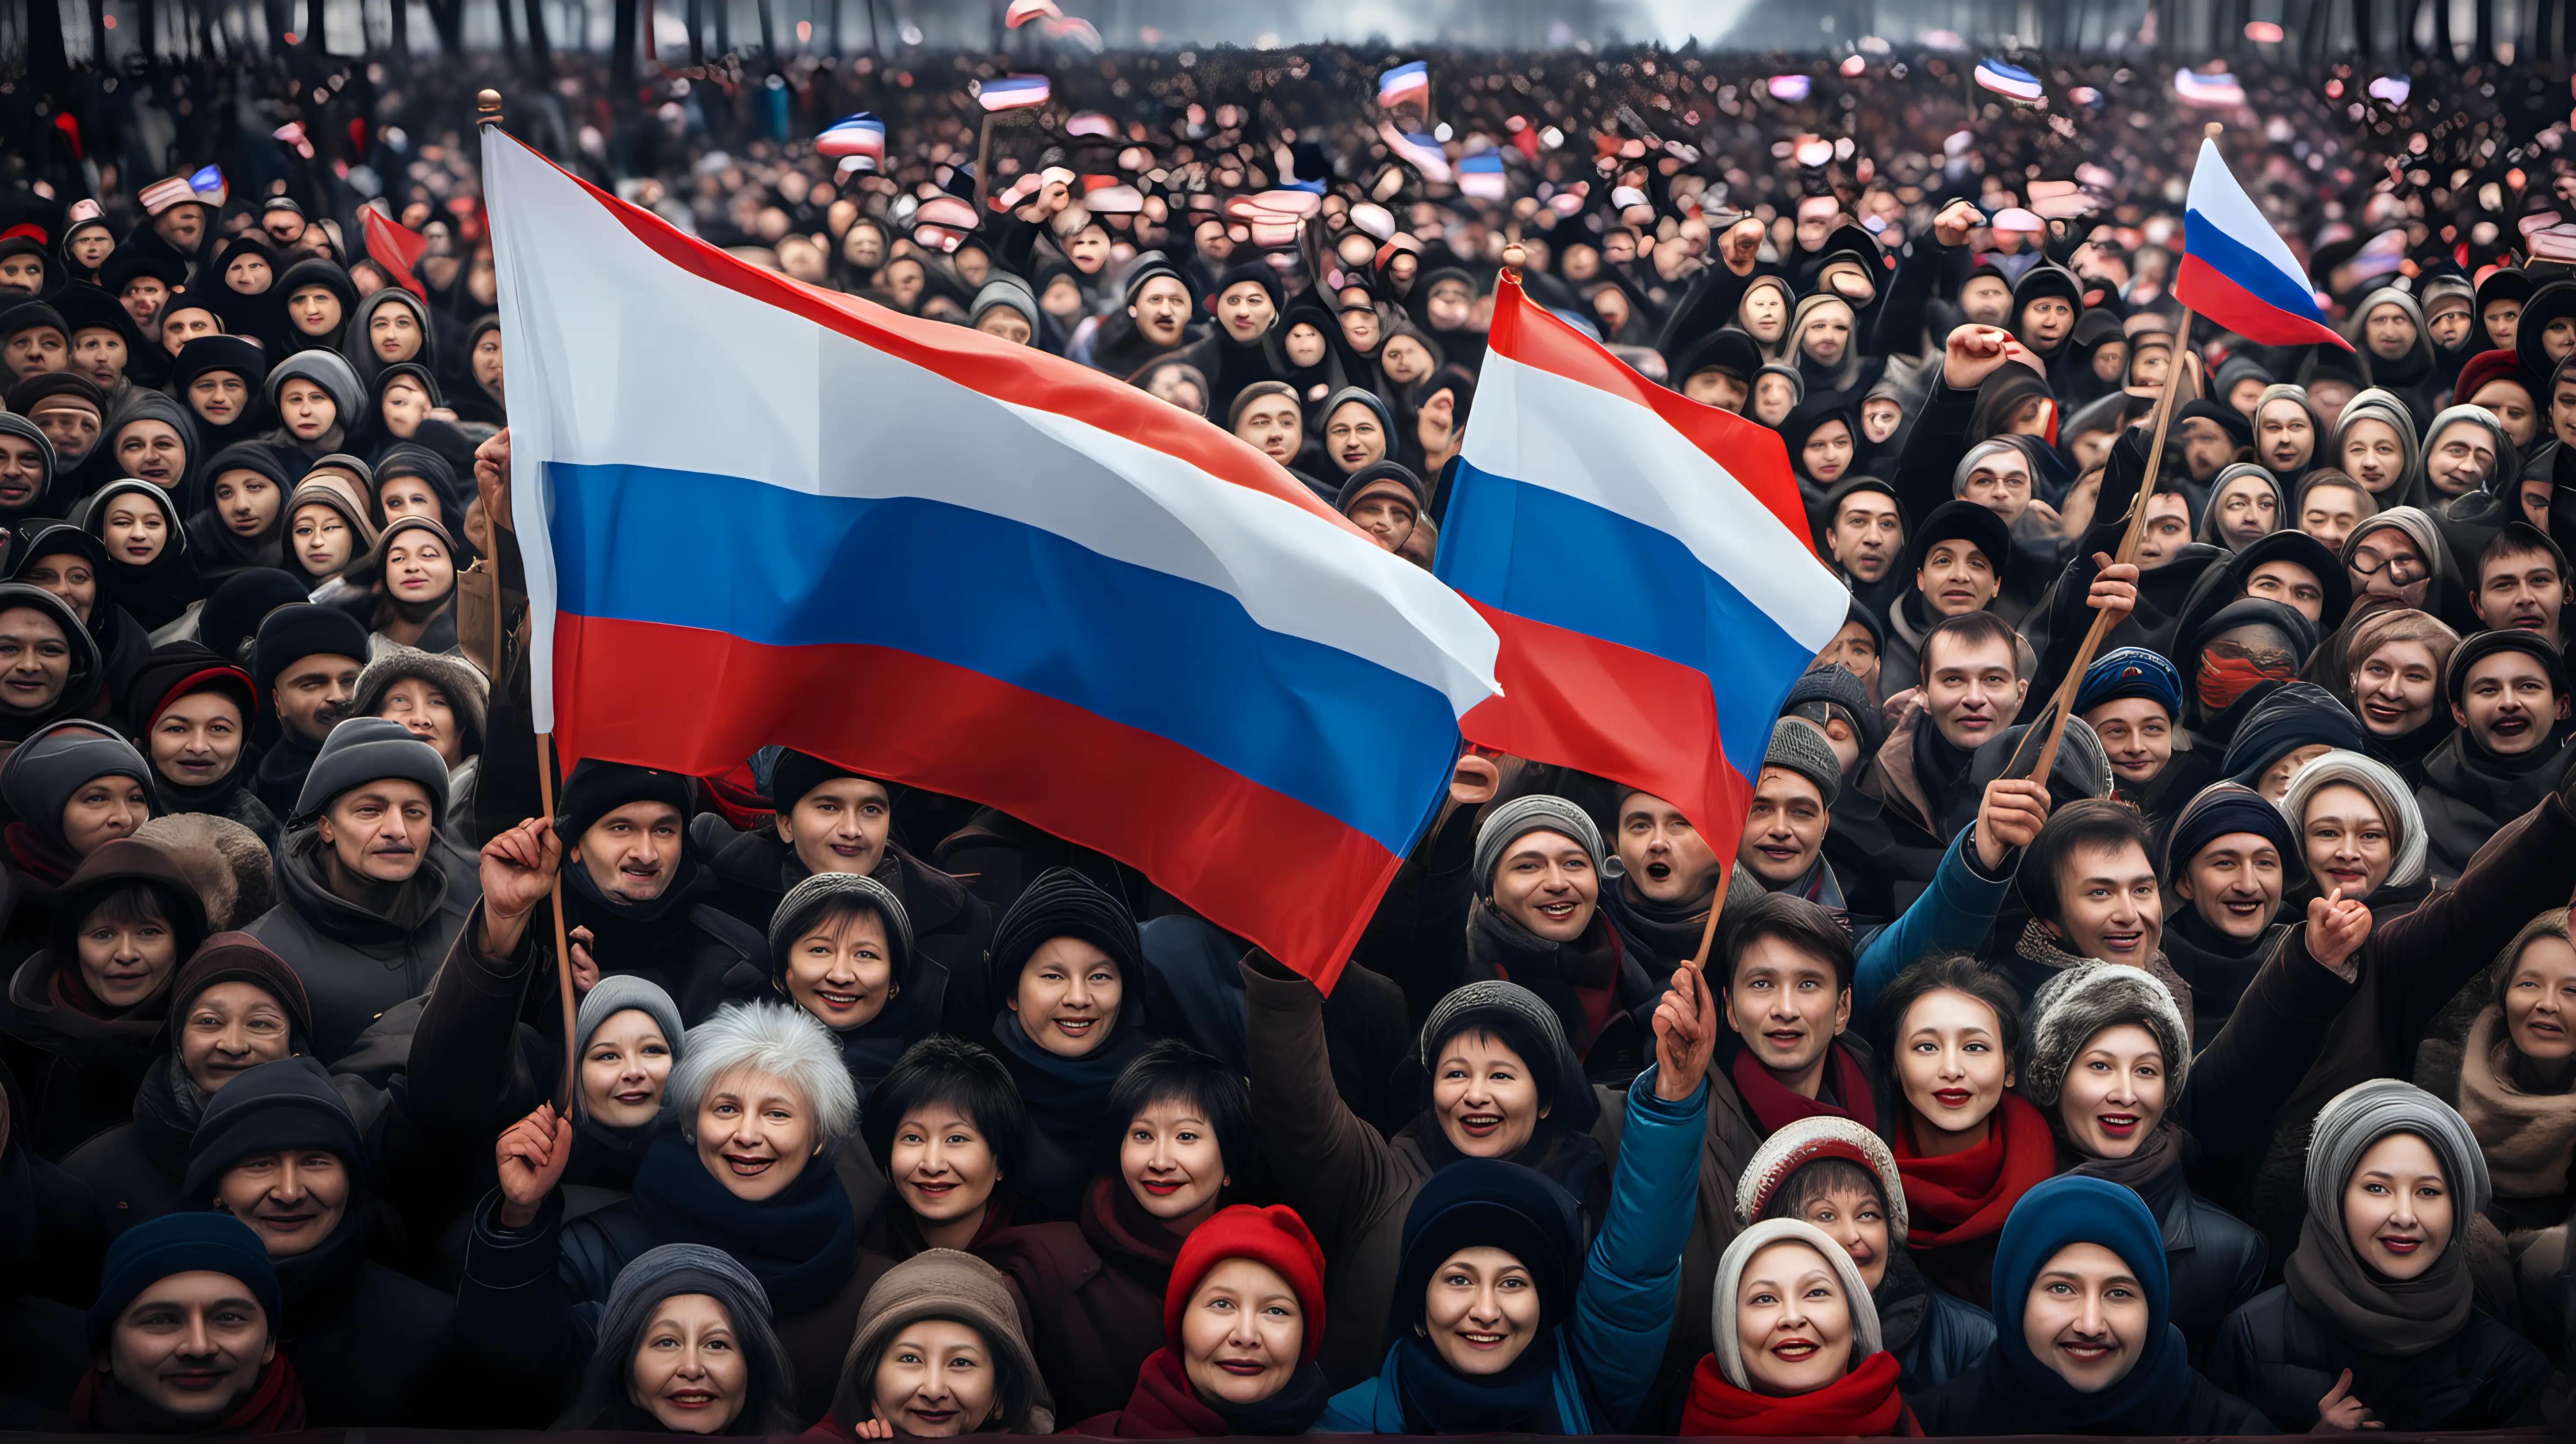 Russian Citizen Proudly Waves Flag at Patriotic Event